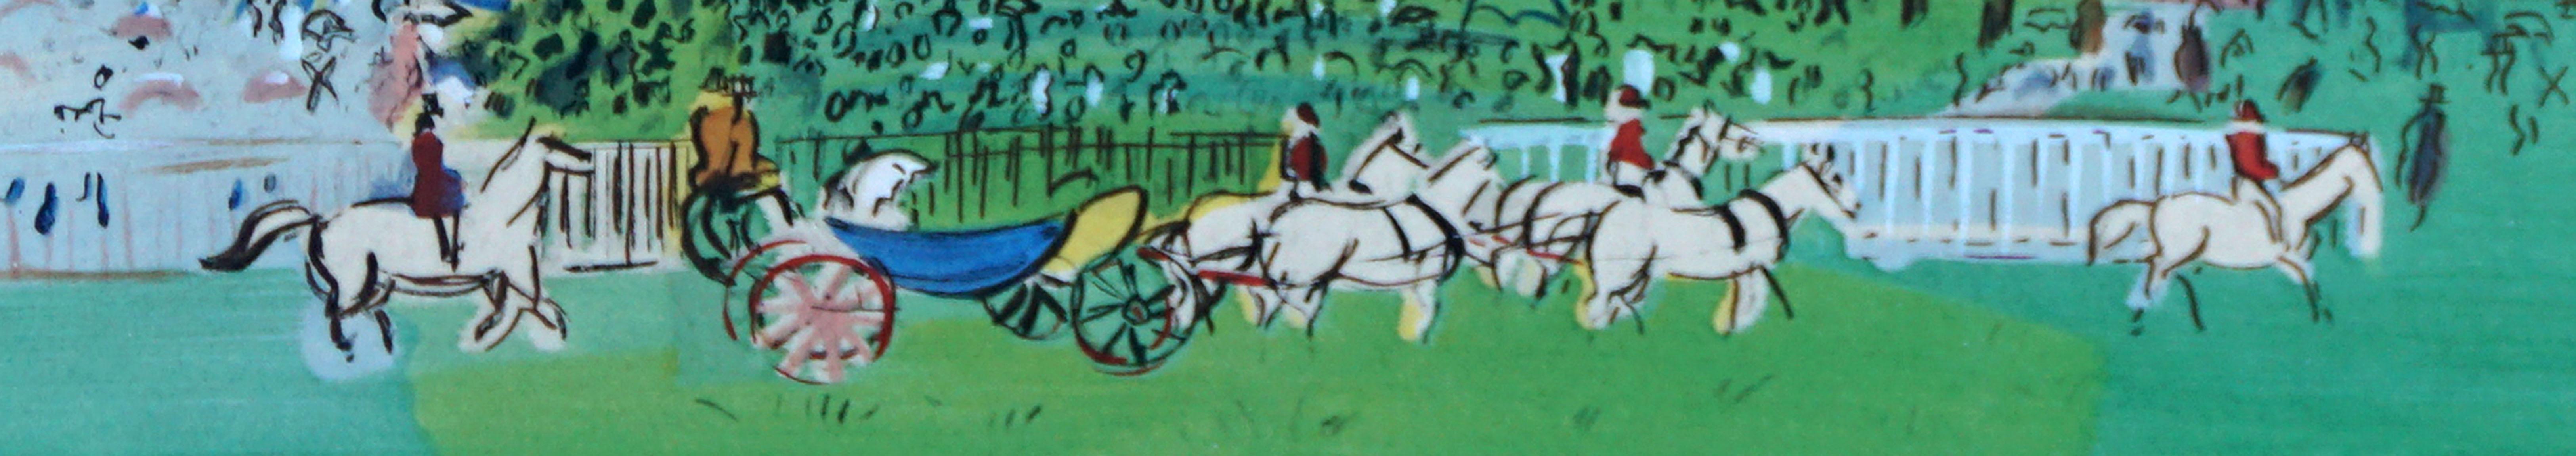 Track At Ascot Silkscreen - Post-Impressionist Print by Raoul Dufy